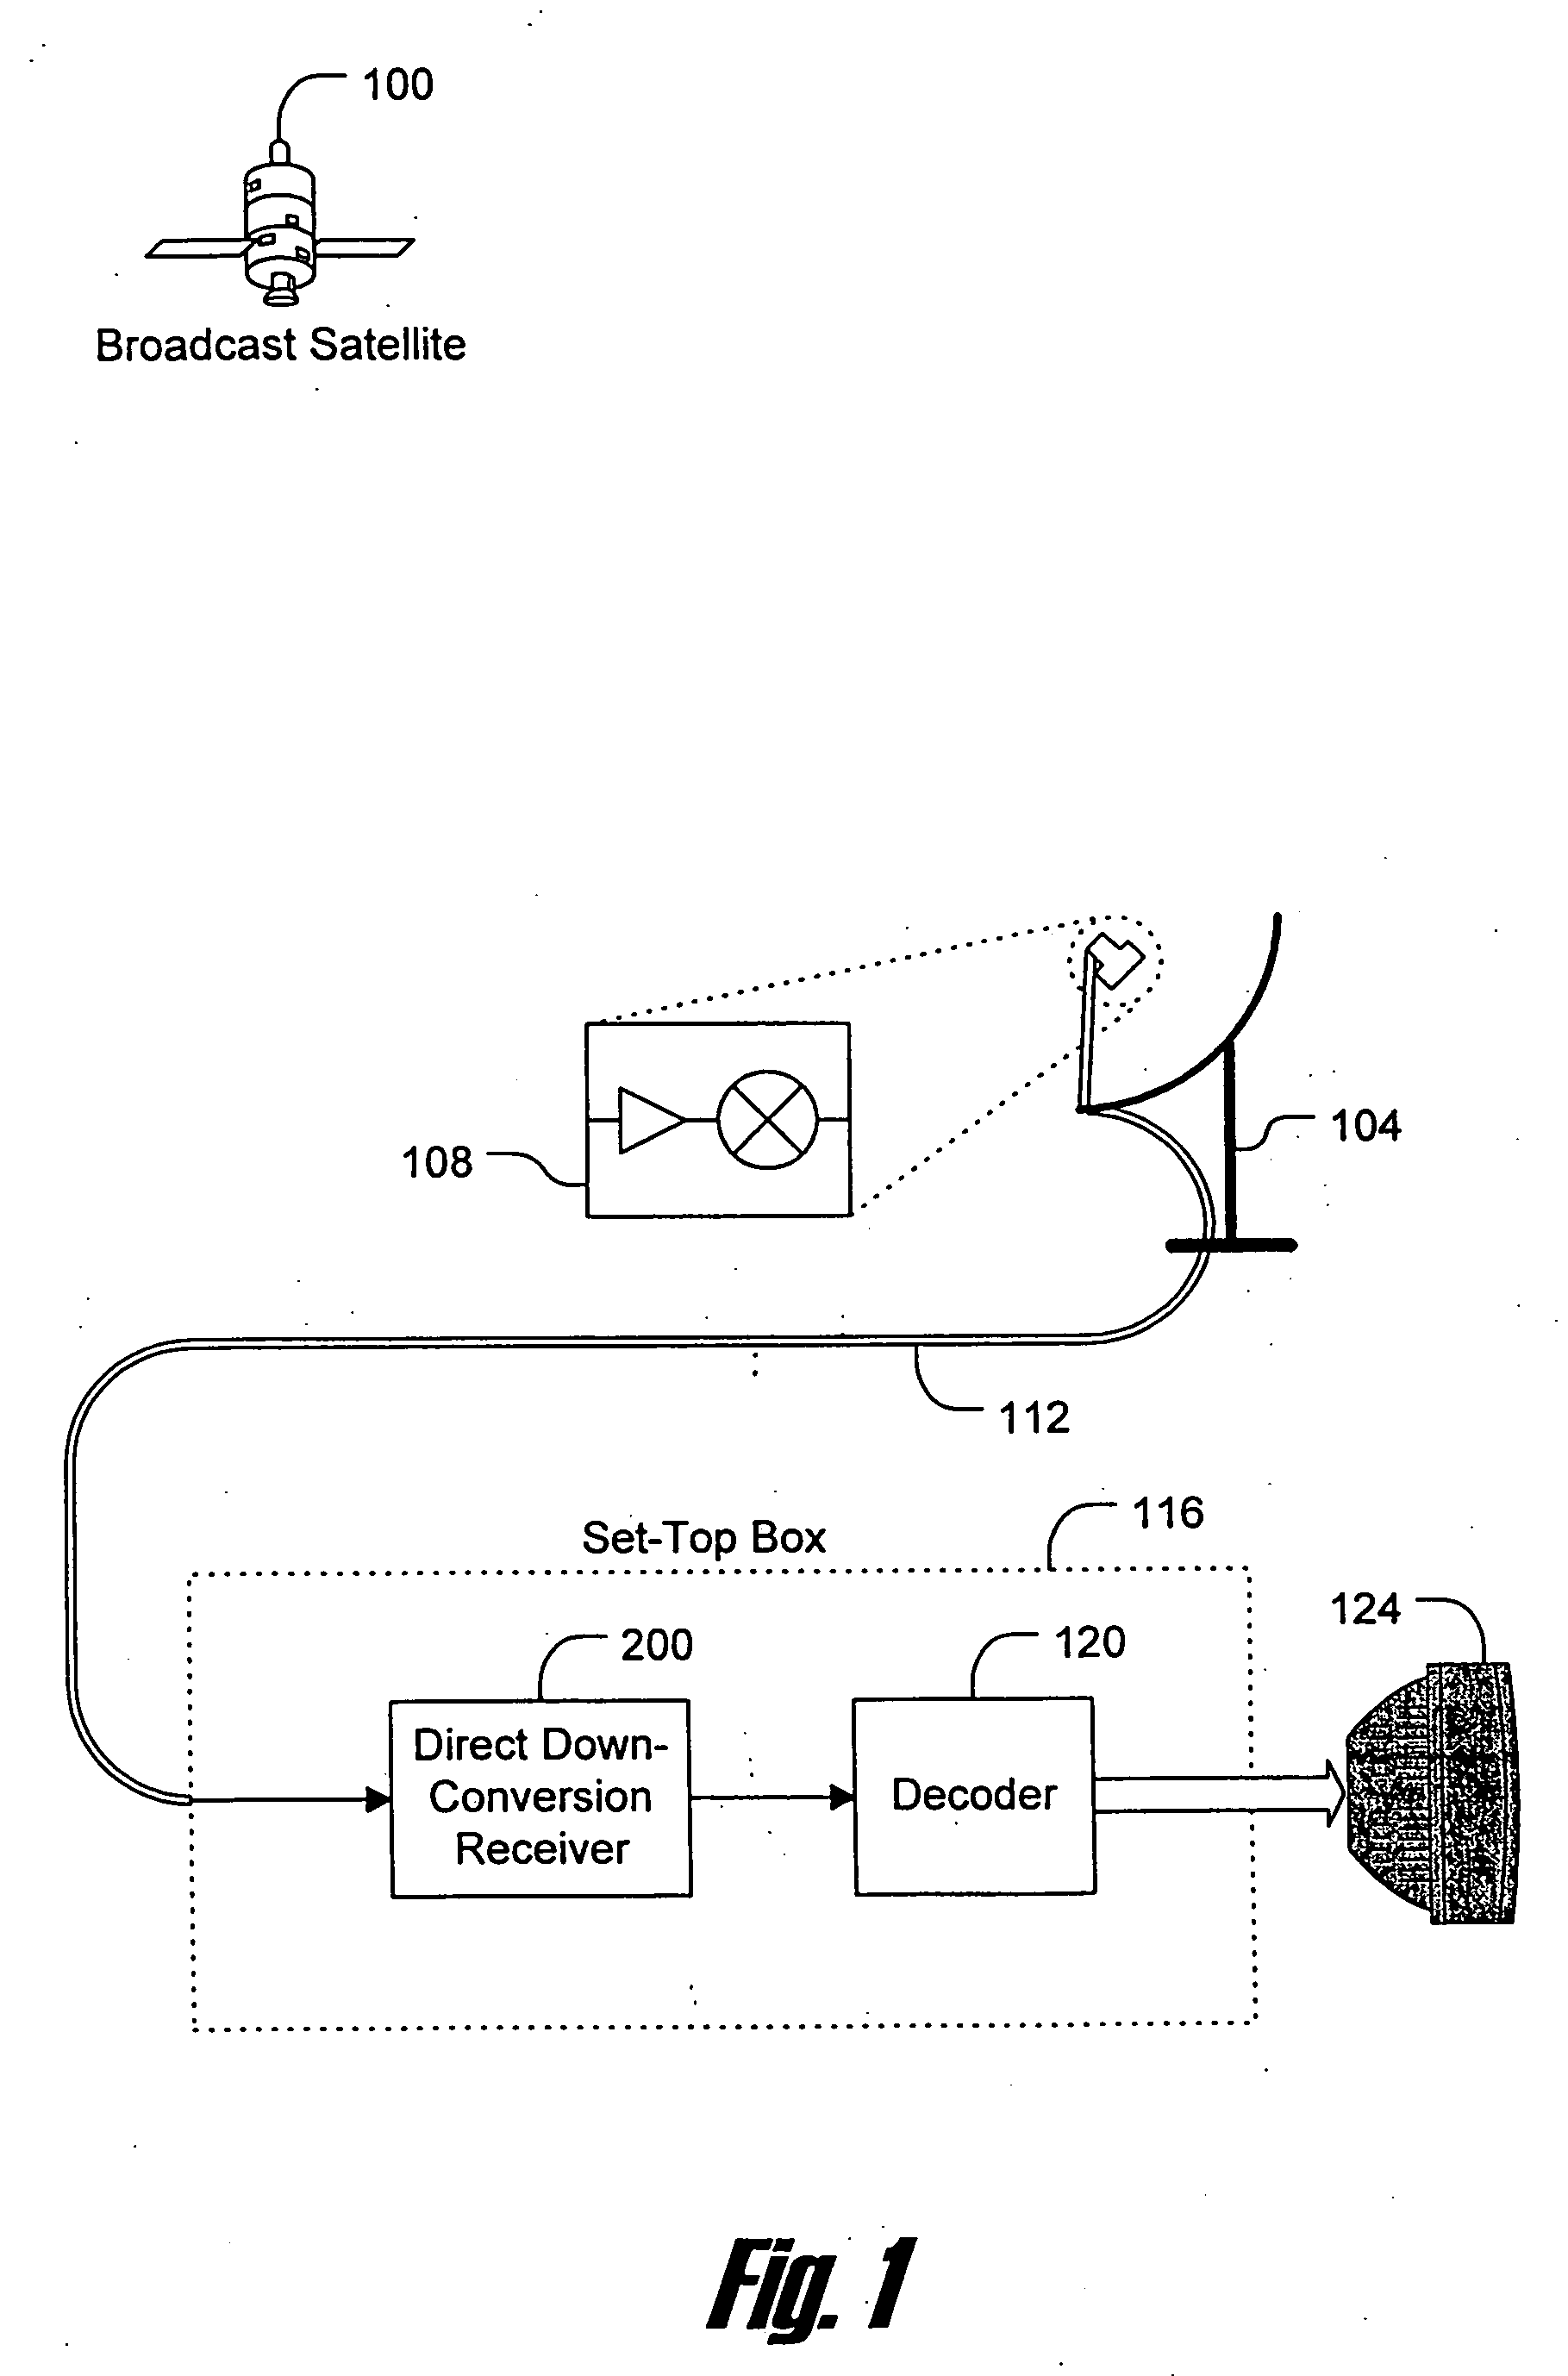 System and method of frequency synthesis to avoid gaps and VCO pulling in direct broadcast statelite systems